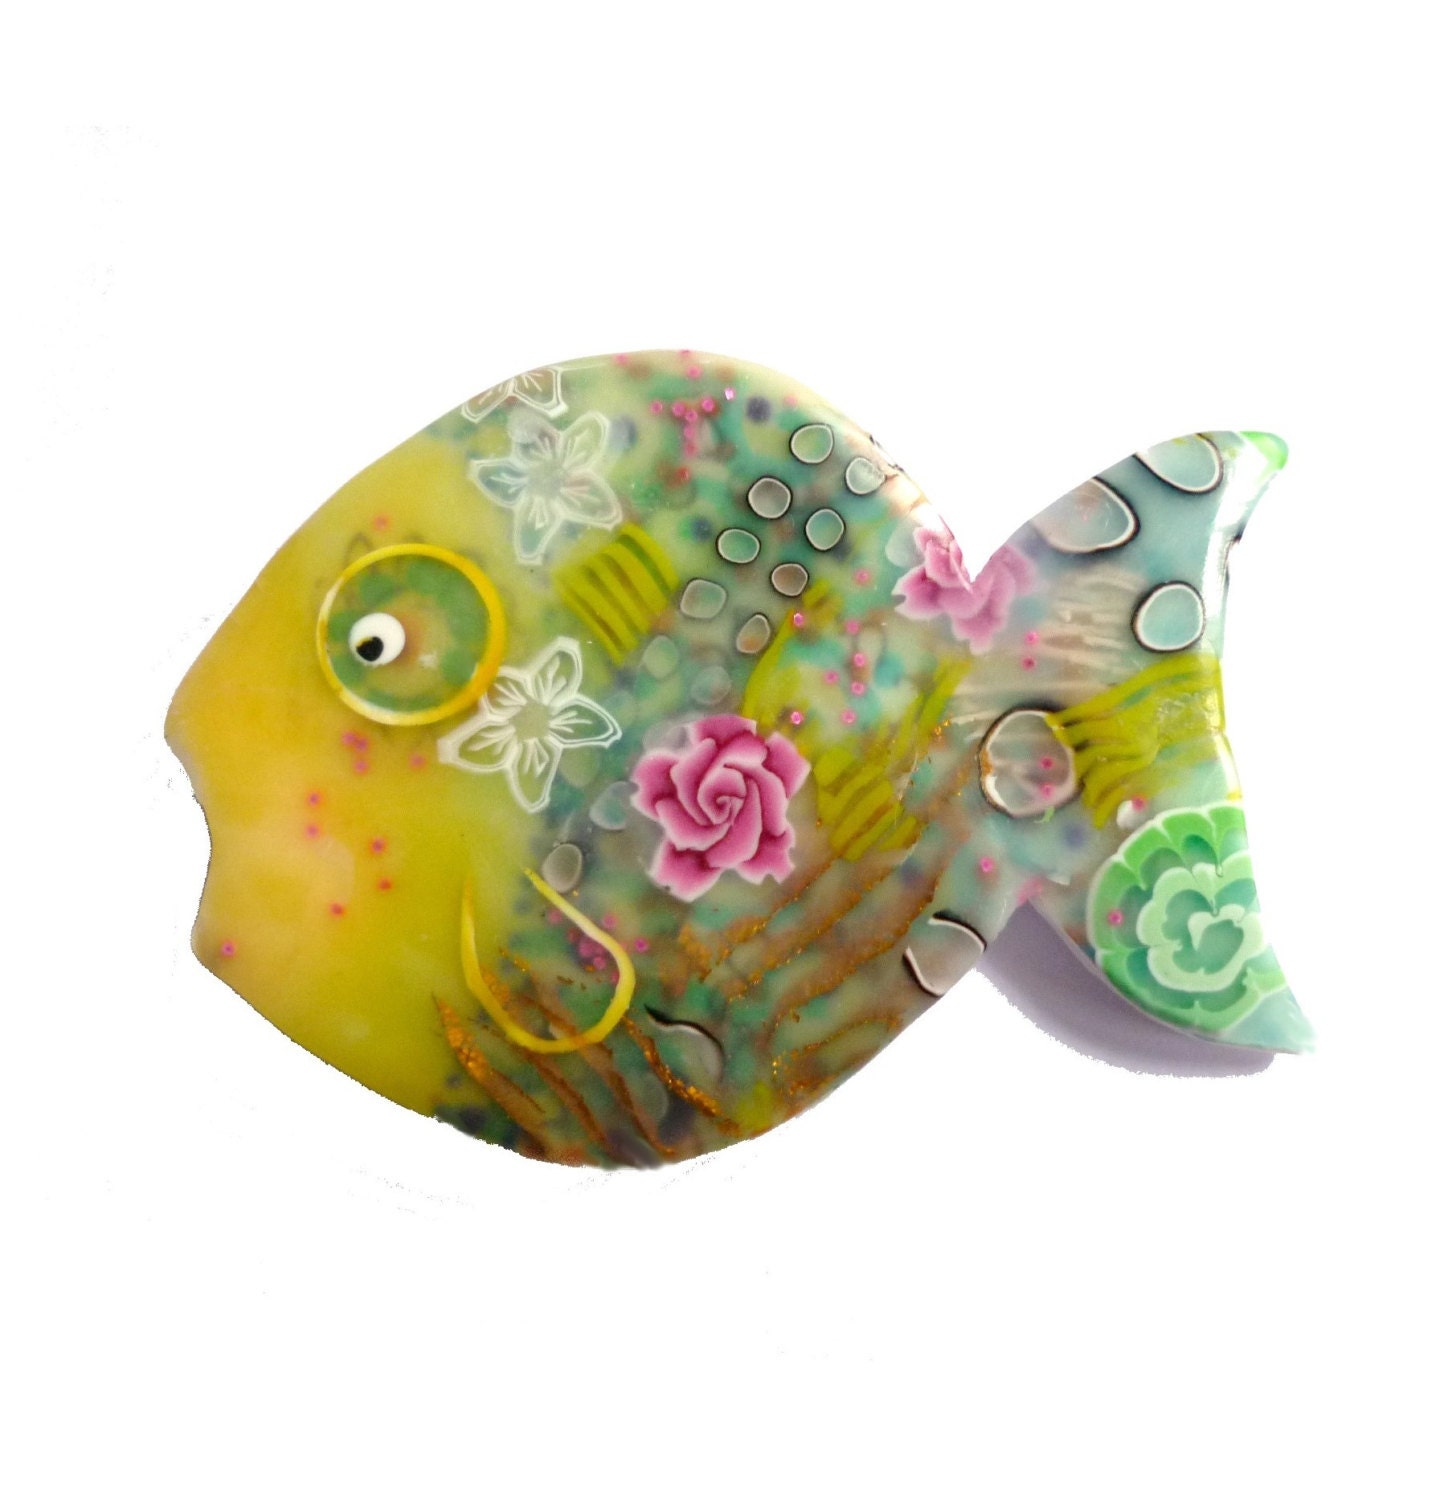 Brooch - ANDREAS the FISH - one of a kind - polymer clay - with pink ROSES - Chifonie